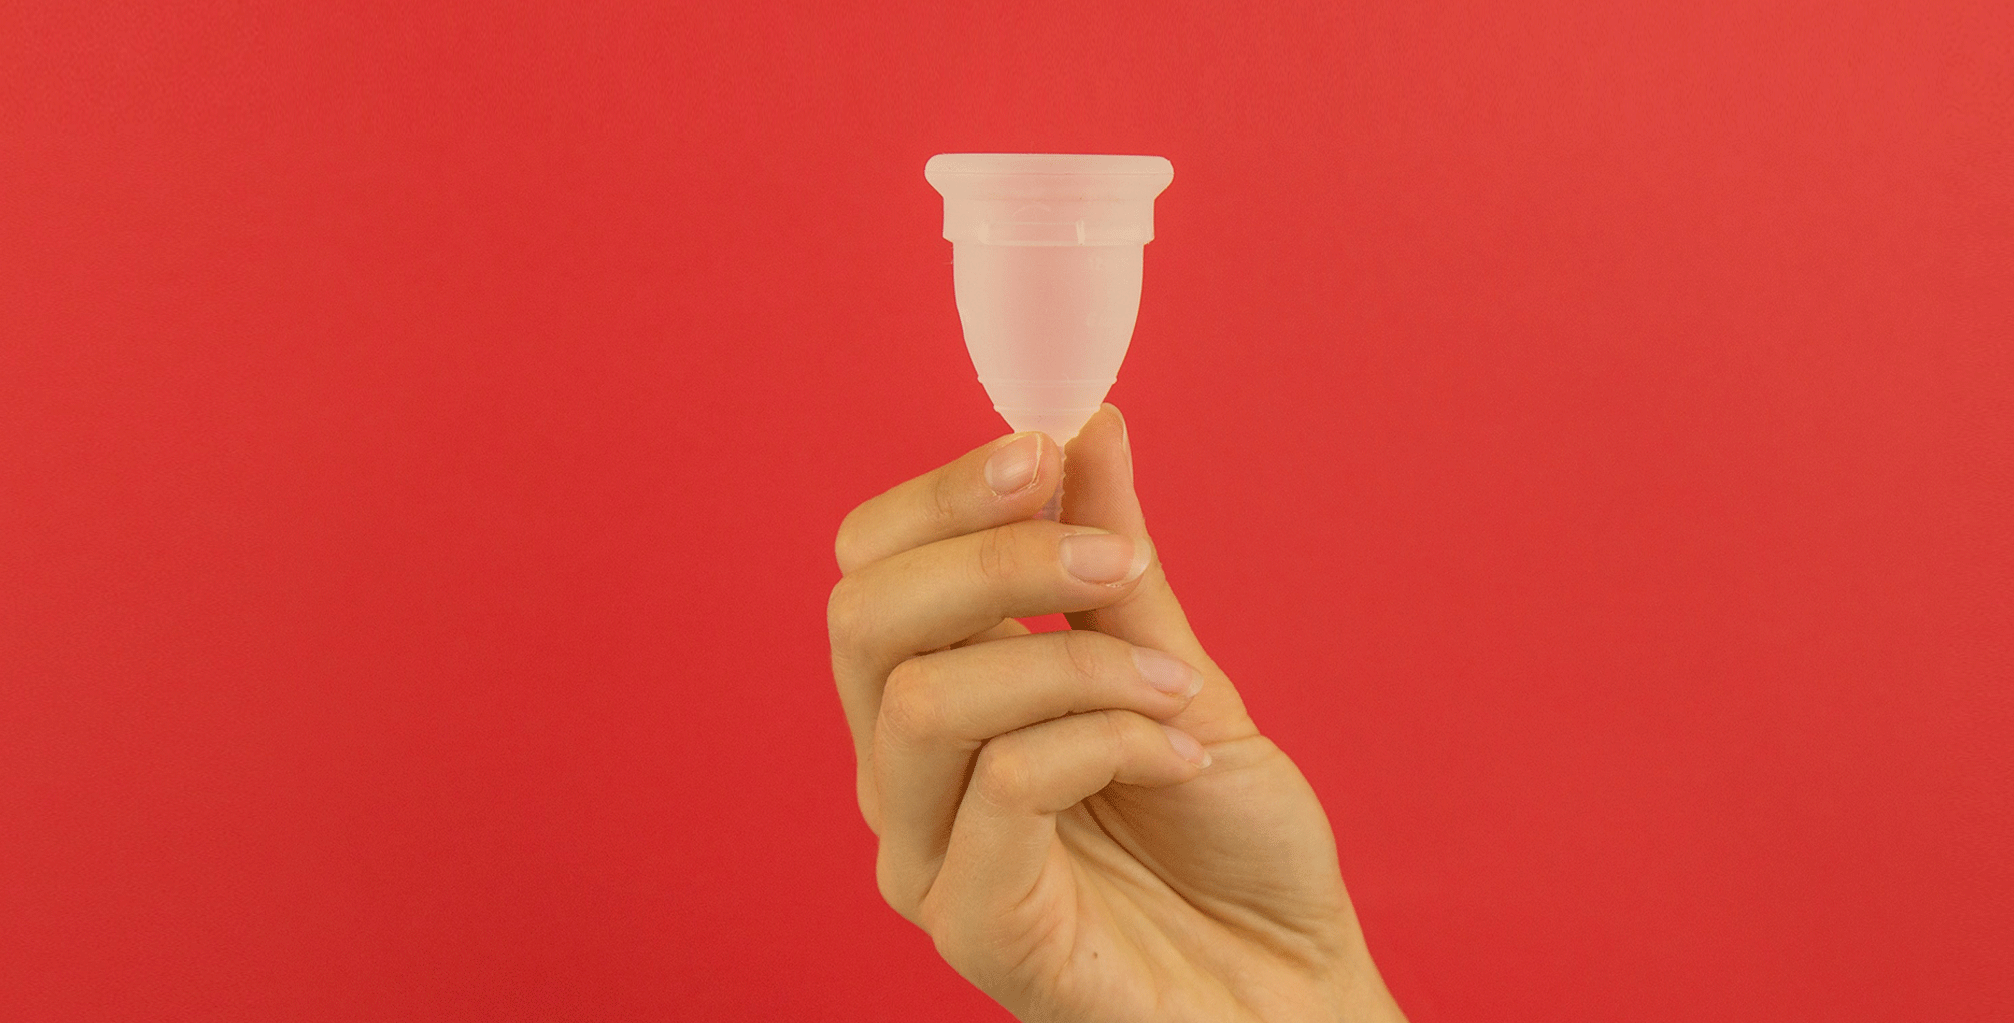 How to Use Menstrual Cup: Insert,Benefits, and More